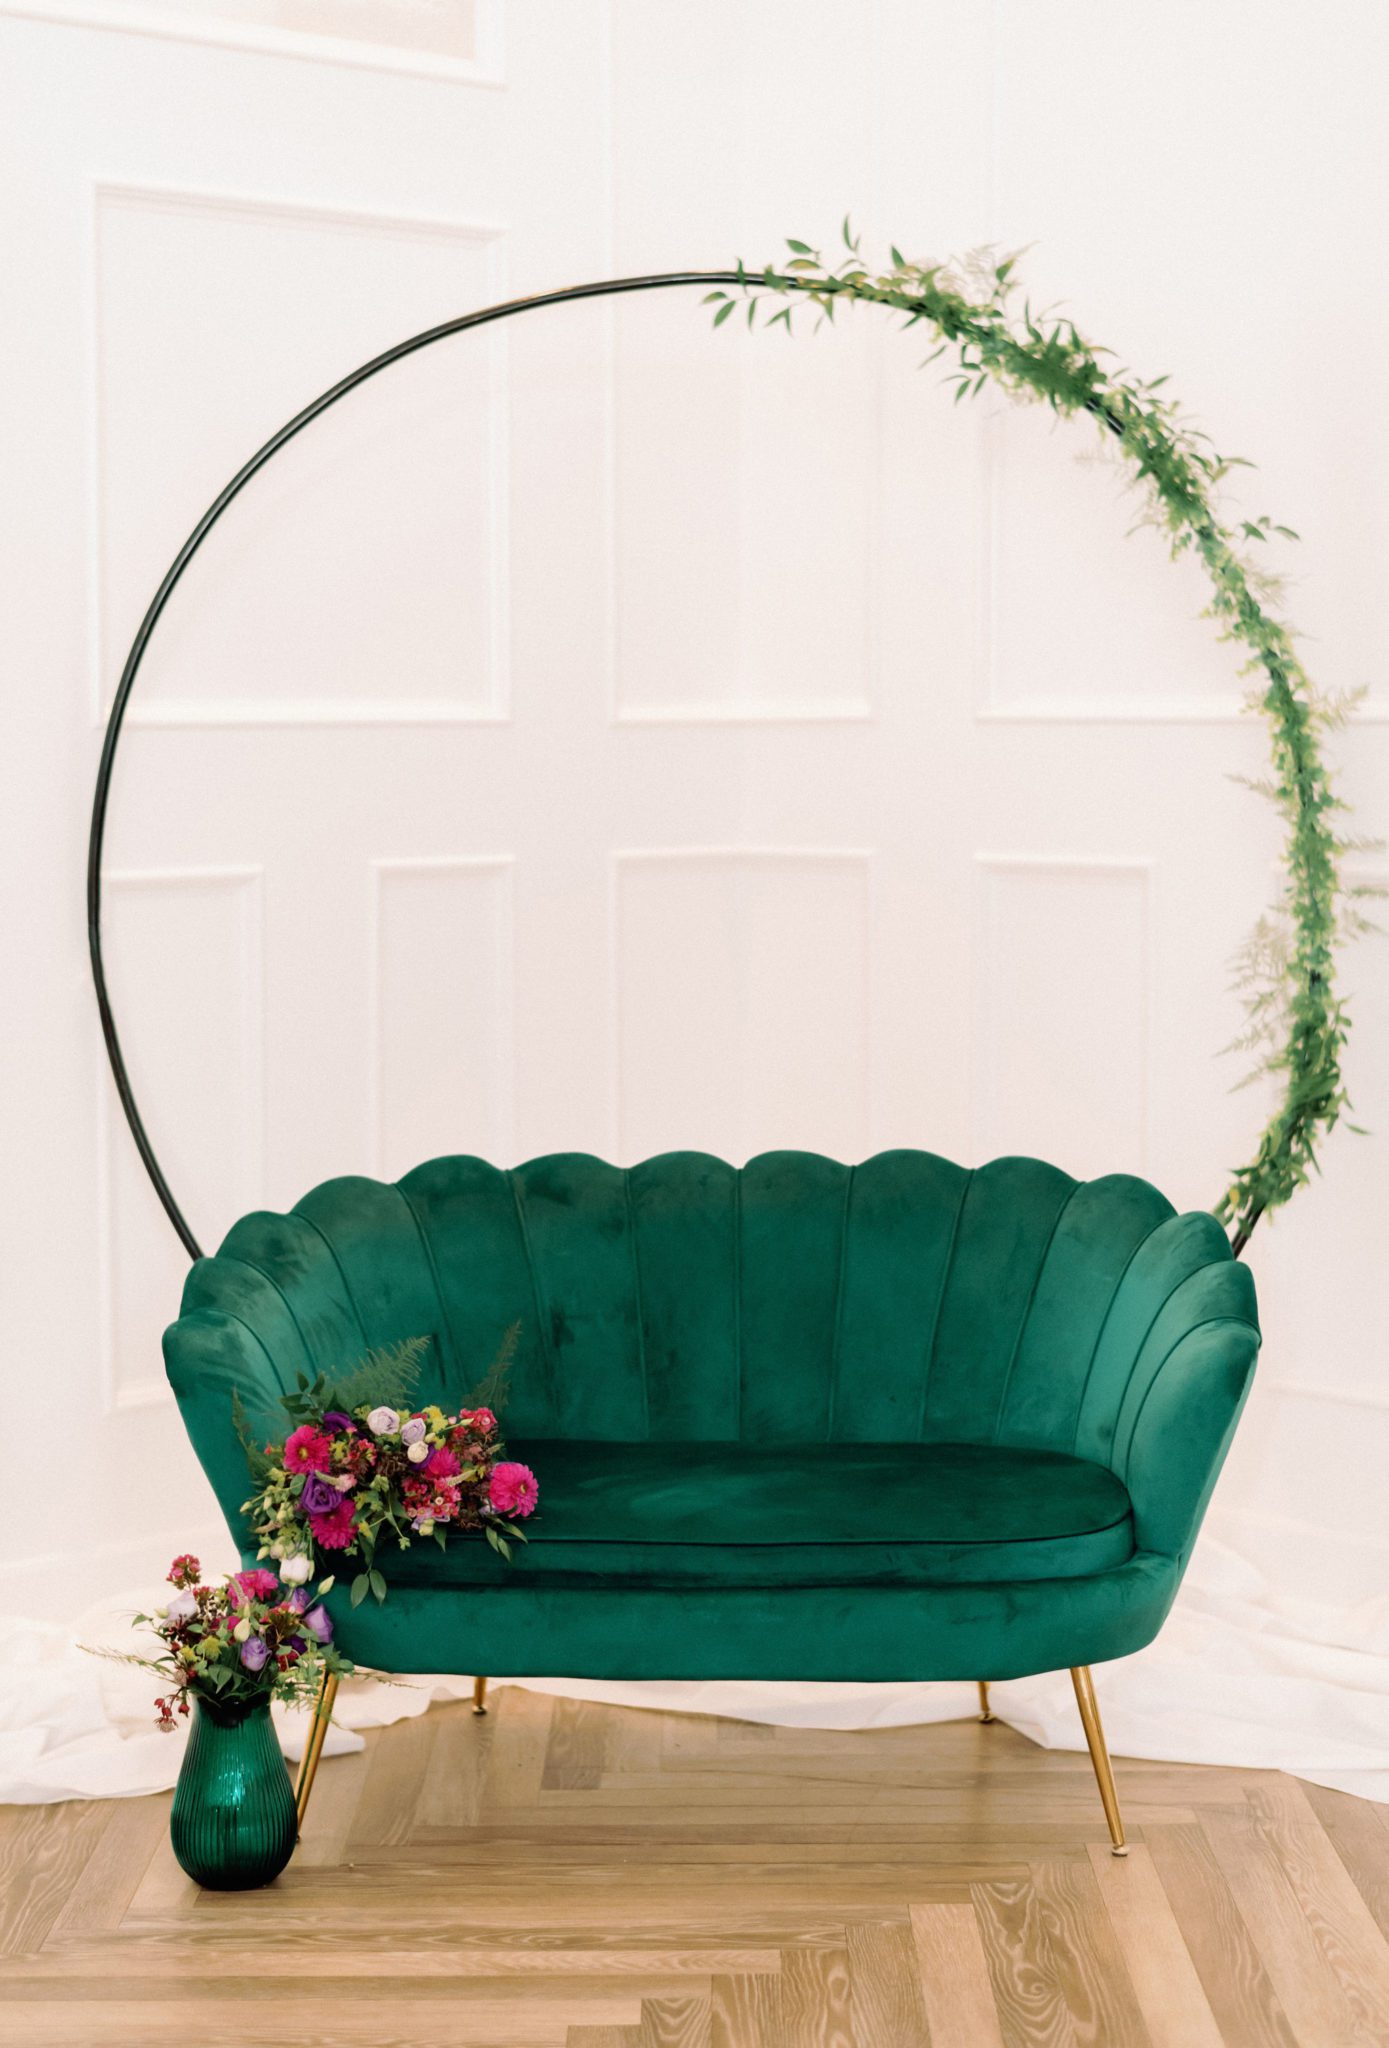 wedding photo backdrop, circle arch with greenery and emerald green couch, Jewel toned Wedding Colour palette